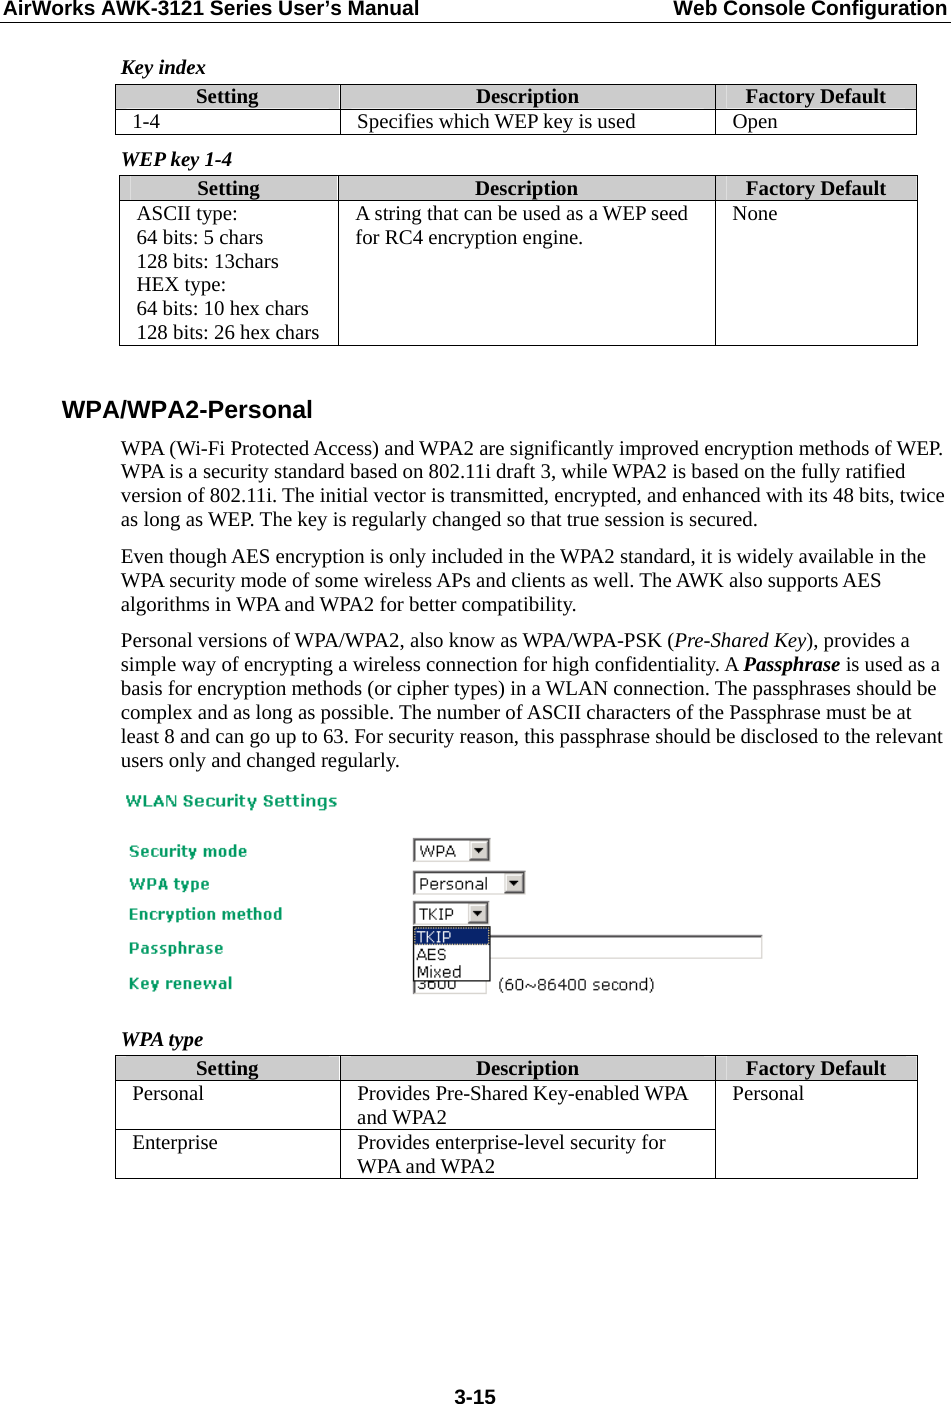 AirWorks AWK-3121 Series User’s Manual  Web Console Configuration  3-15Key index Setting  Description  Factory Default 1-4  Specifies which WEP key is used  Open WEP key 1-4 Setting  Description  Factory Default ASCII type: 64 bits: 5 chars 128 bits: 13chars HEX type: 64 bits: 10 hex chars 128 bits: 26 hex chars A string that can be used as a WEP seed for RC4 encryption engine.  None  WPA/WPA2-Personal WPA (Wi-Fi Protected Access) and WPA2 are significantly improved encryption methods of WEP. WPA is a security standard based on 802.11i draft 3, while WPA2 is based on the fully ratified version of 802.11i. The initial vector is transmitted, encrypted, and enhanced with its 48 bits, twice as long as WEP. The key is regularly changed so that true session is secured. Even though AES encryption is only included in the WPA2 standard, it is widely available in the WPA security mode of some wireless APs and clients as well. The AWK also supports AES algorithms in WPA and WPA2 for better compatibility. Personal versions of WPA/WPA2, also know as WPA/WPA-PSK (Pre-Shared Key), provides a simple way of encrypting a wireless connection for high confidentiality. A Passphrase is used as a basis for encryption methods (or cipher types) in a WLAN connection. The passphrases should be complex and as long as possible. The number of ASCII characters of the Passphrase must be at least 8 and can go up to 63. For security reason, this passphrase should be disclosed to the relevant users only and changed regularly.  WPA type Setting  Description  Factory Default Personal Provides Pre-Shared Key-enabled WPA and WPA2 Enterprise  Provides enterprise-level security for WPA and WPA2 Personal     